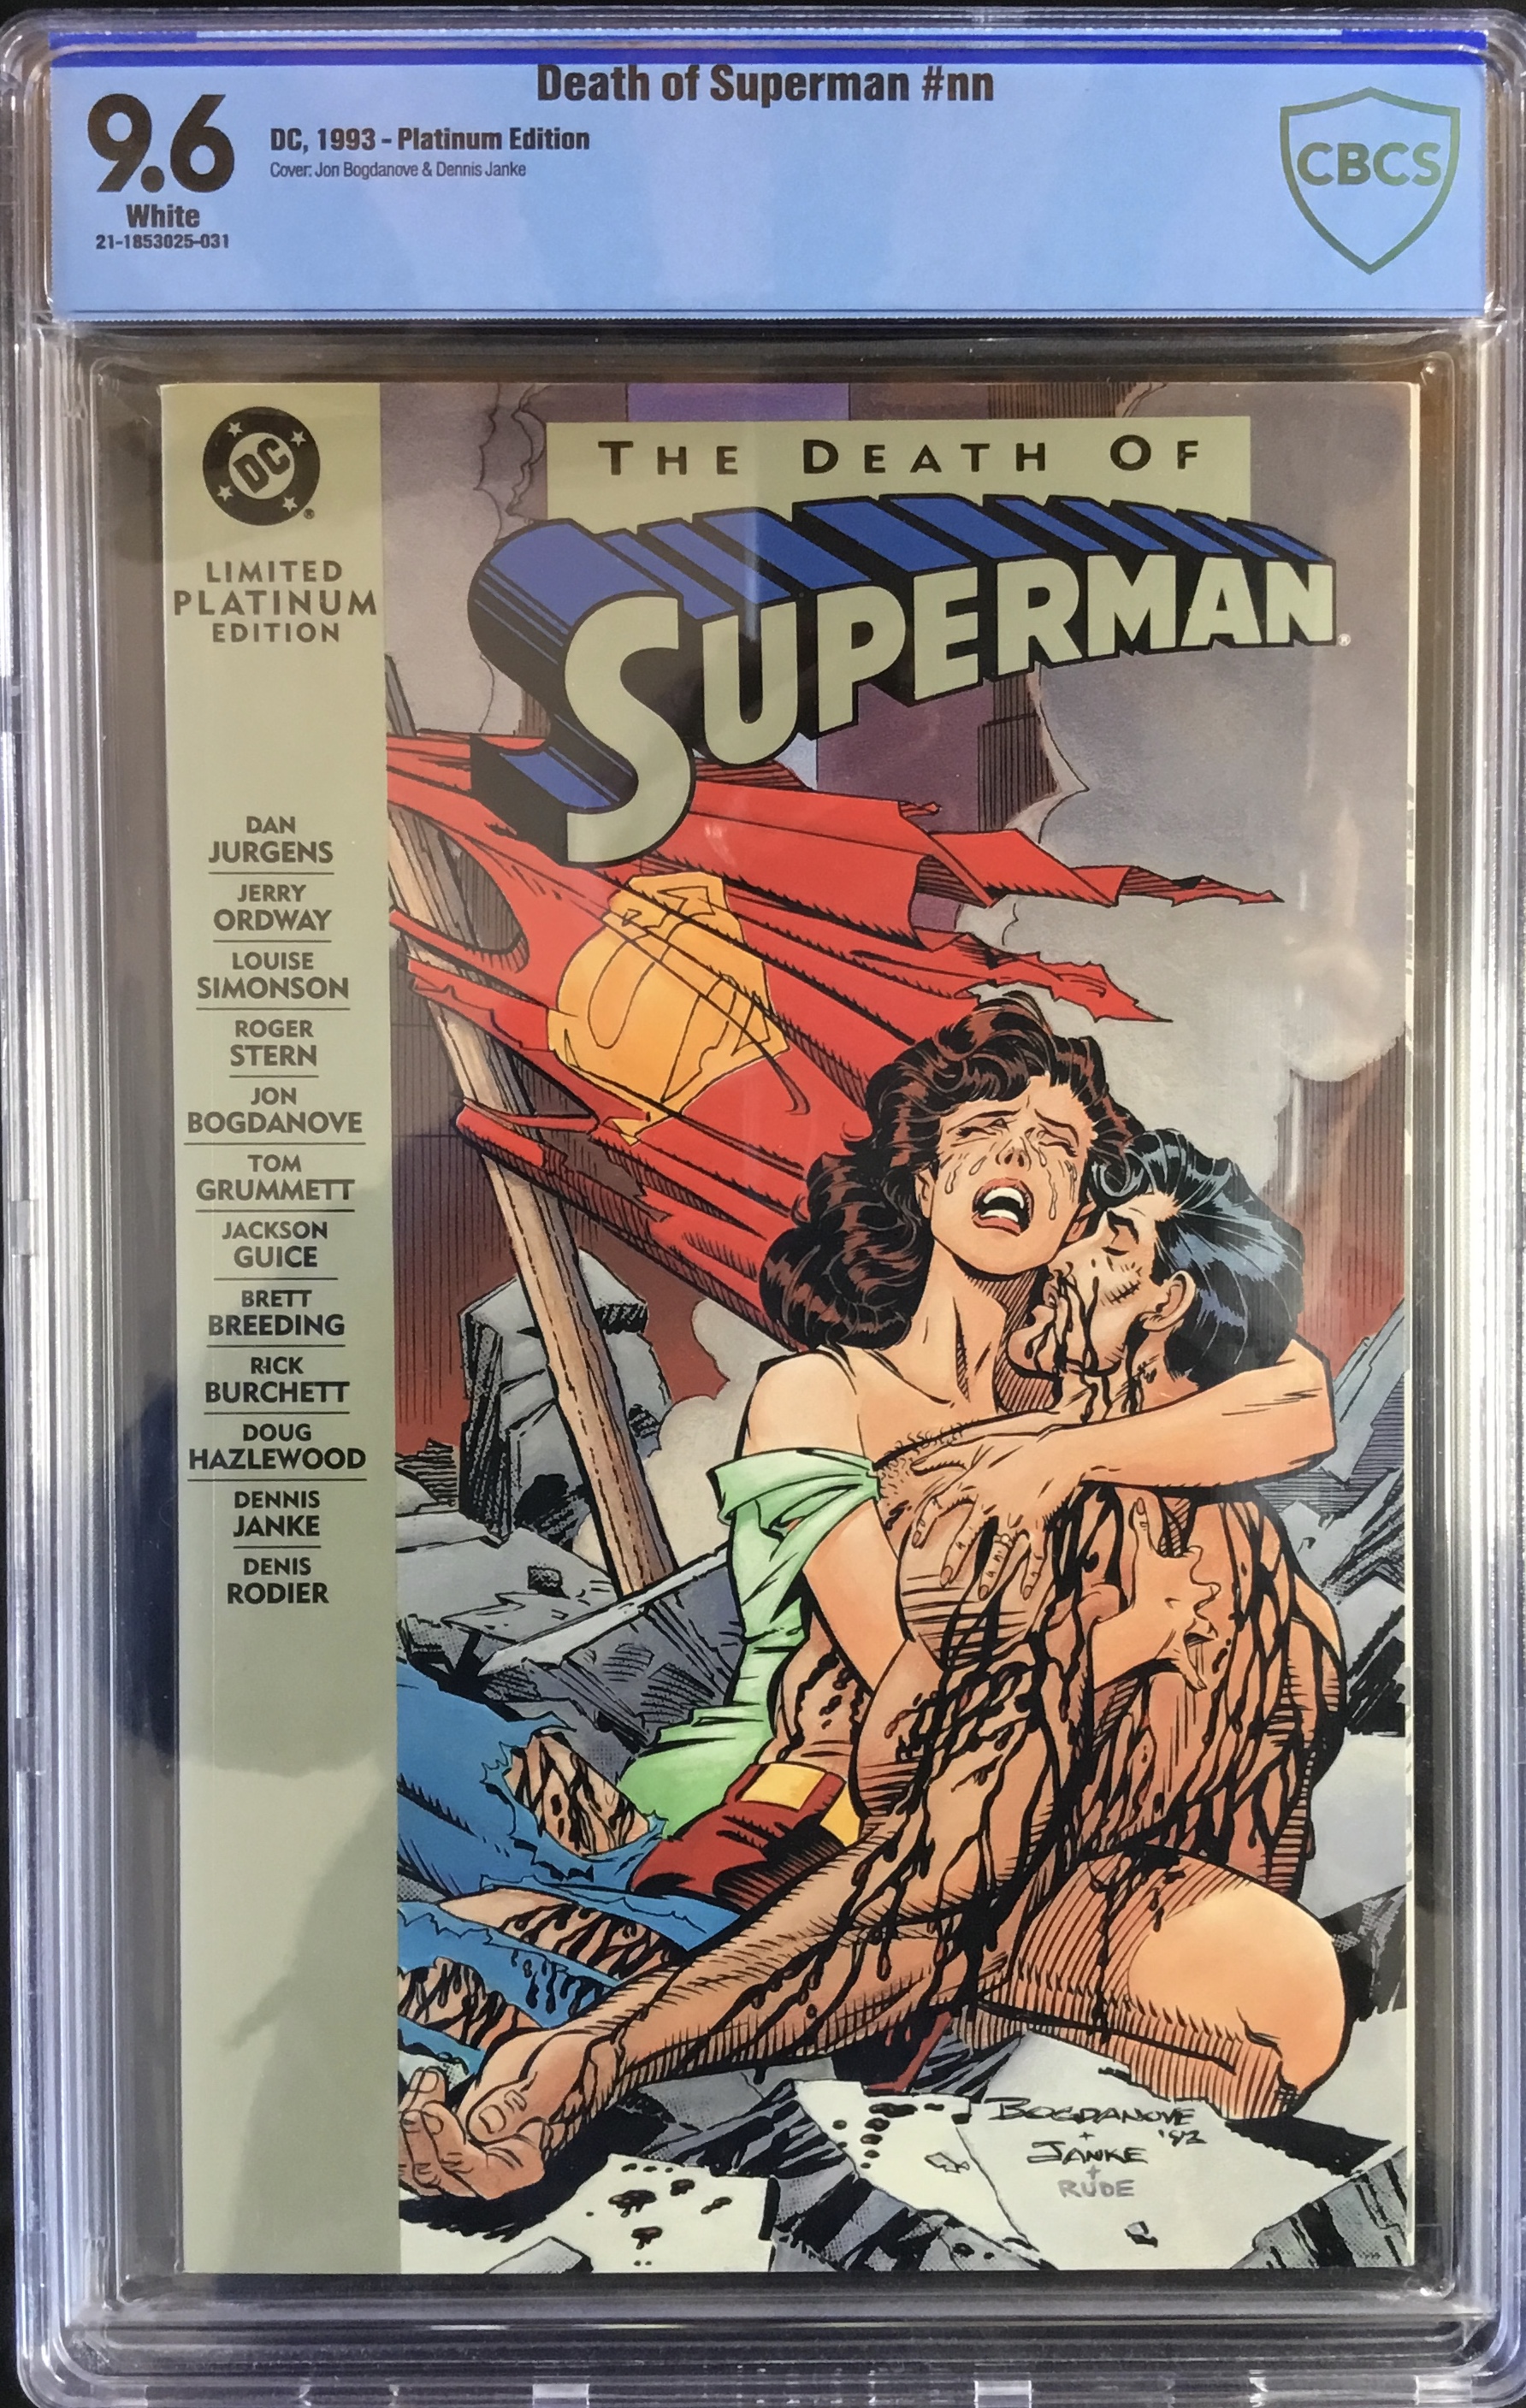 The DEATH of SUPERMAN Limited Platinum Edition tpb - CBCS (like CGC) Graded   (NM+) by JURGENS, DAN : ORDWAY, JERRY : SIMONSON, LOUISE : STERN,  ROGER: (1993) 1st Edition Comic | OUTSIDER ENTERPRISES